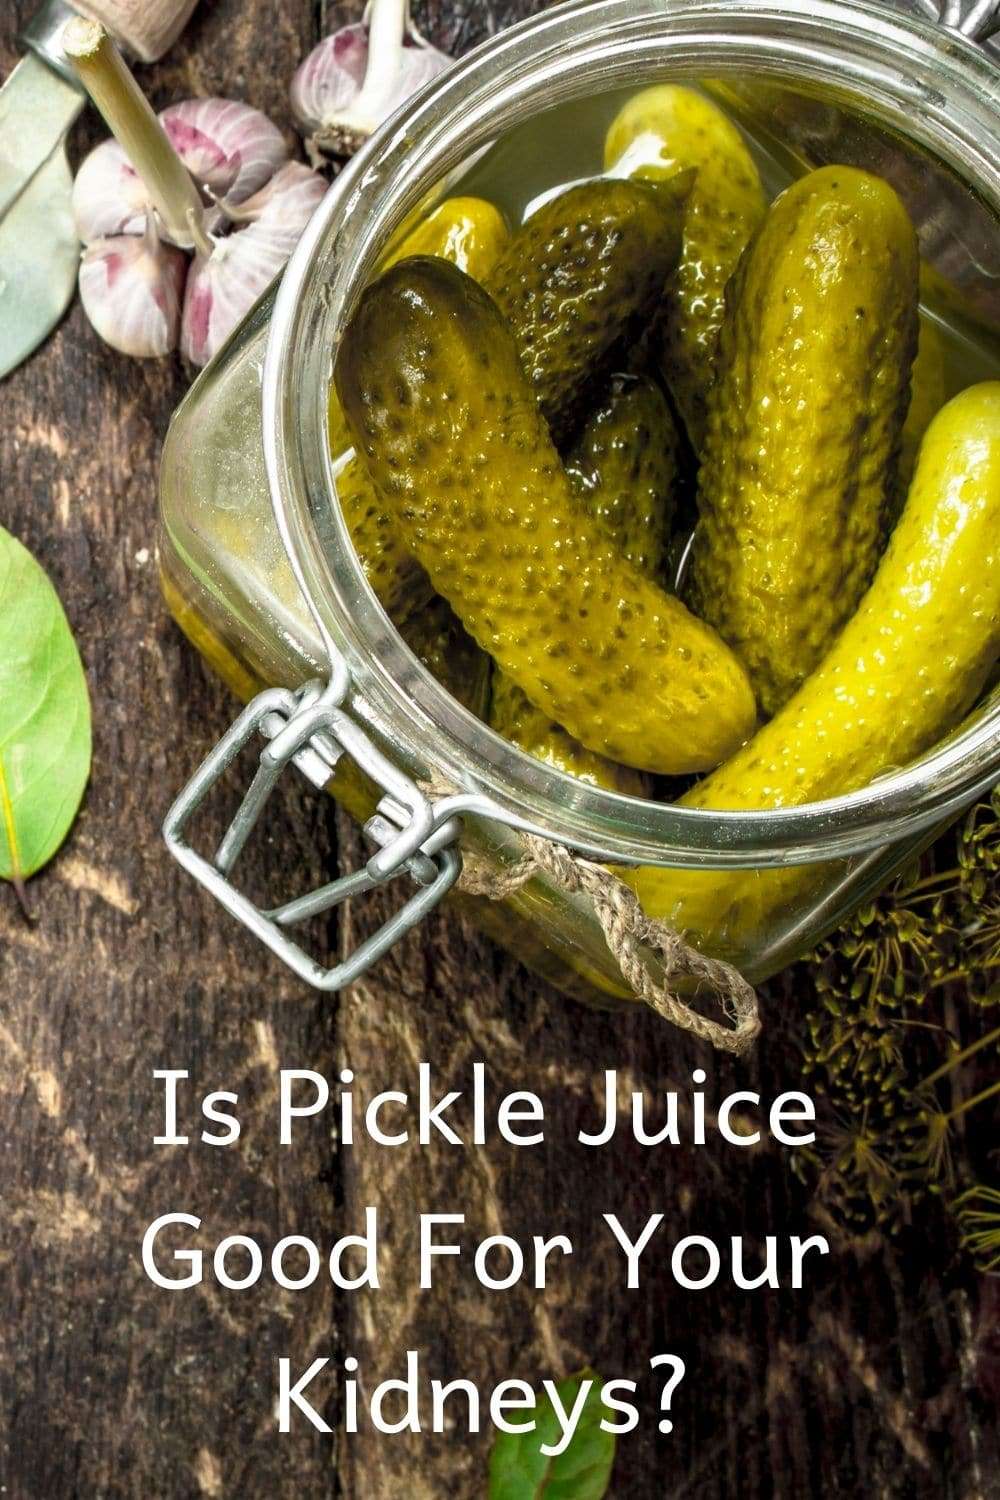 Is Pickle Juice Good For Your Kidneys?